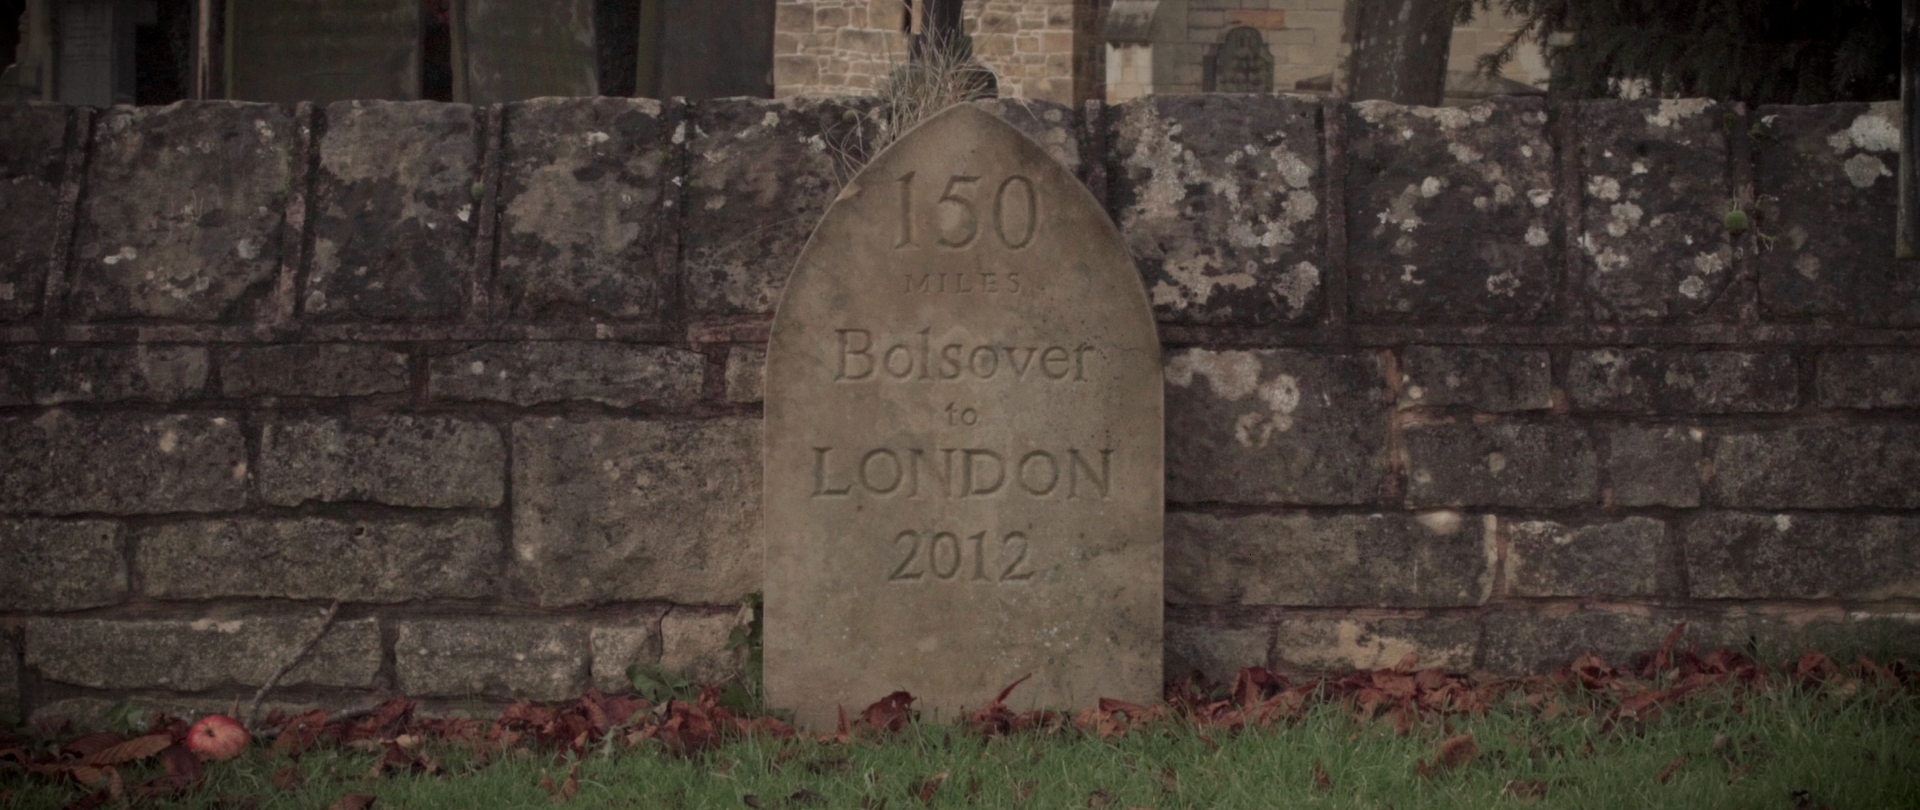 'a ROLE to PLAY' Bolsover mile stone